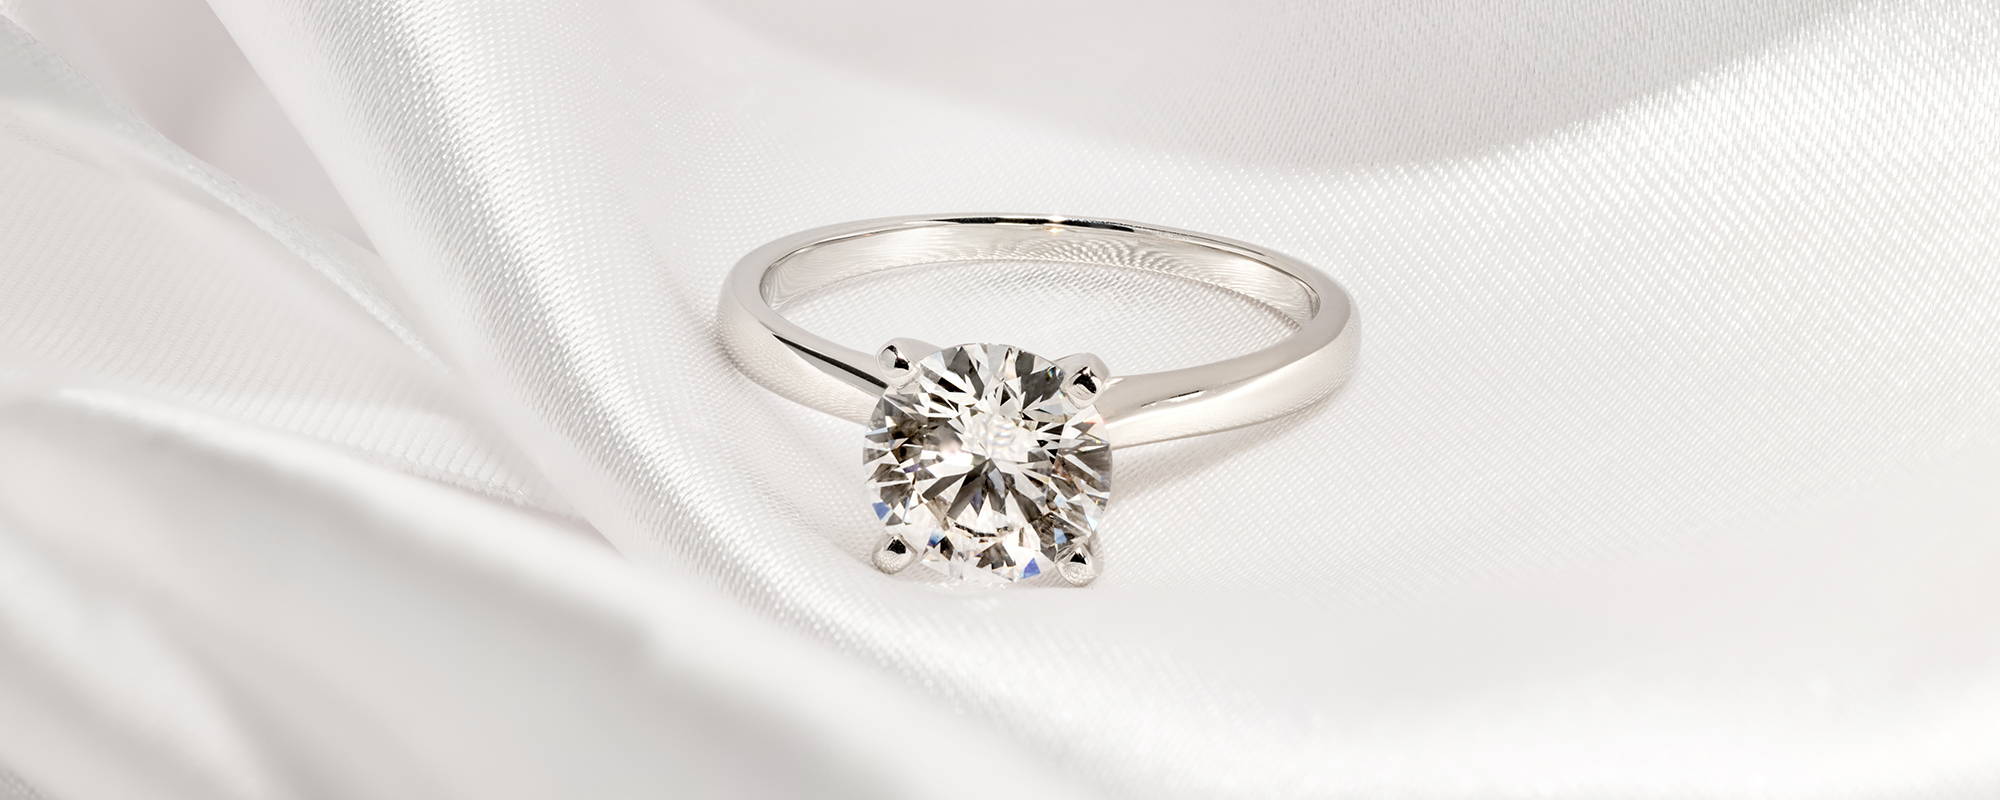 Budgeting for an Affordable Engagement Ring